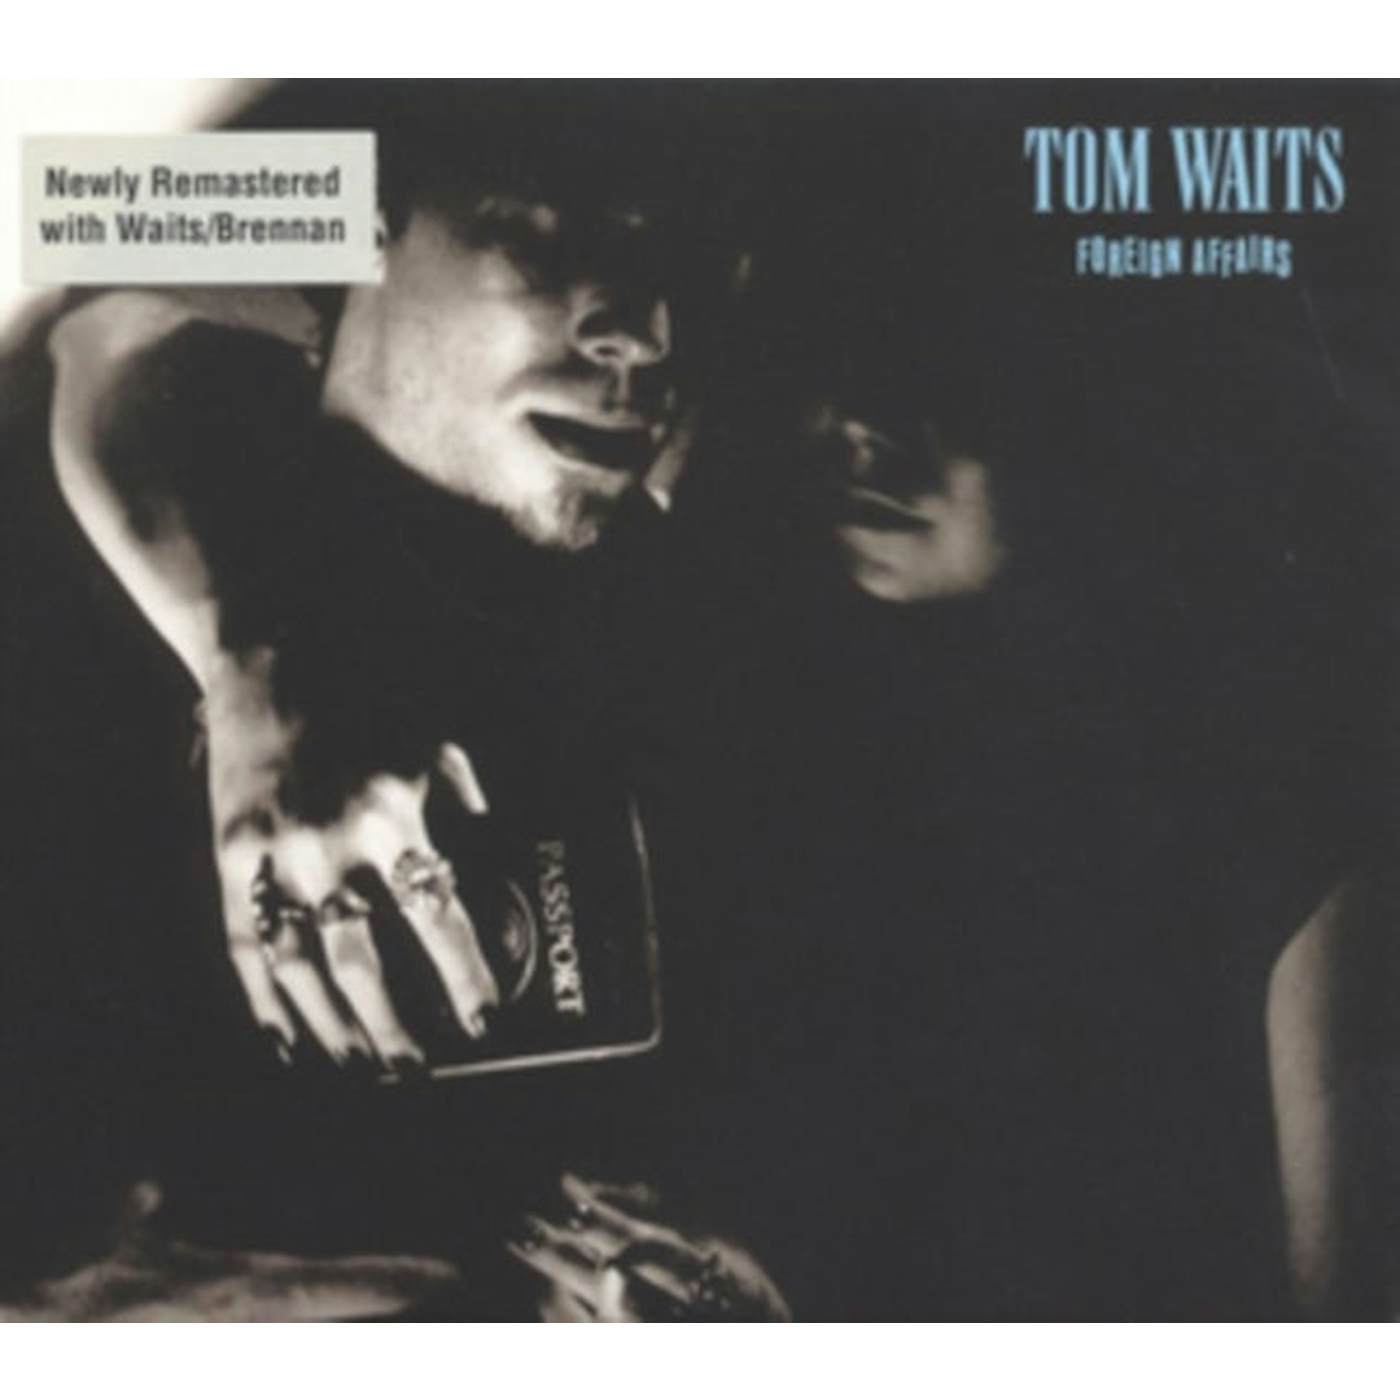 Tom Waits LP Vinyl Record - Foreign Affairs (Remastered Edition)